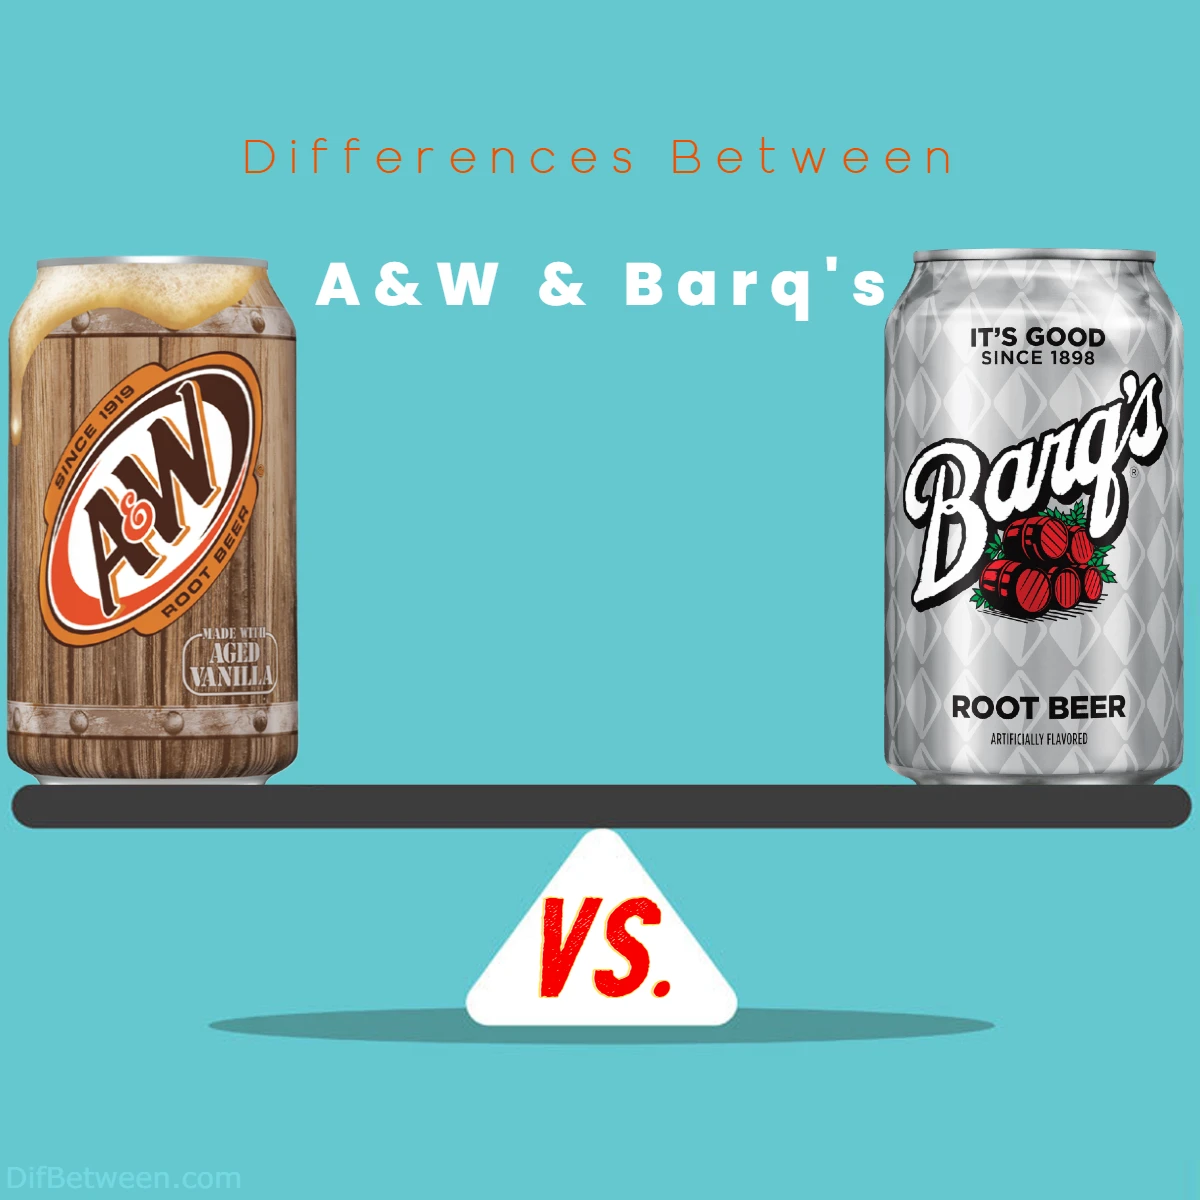 Differences Between Barqs Root Beer and AW Root Beer